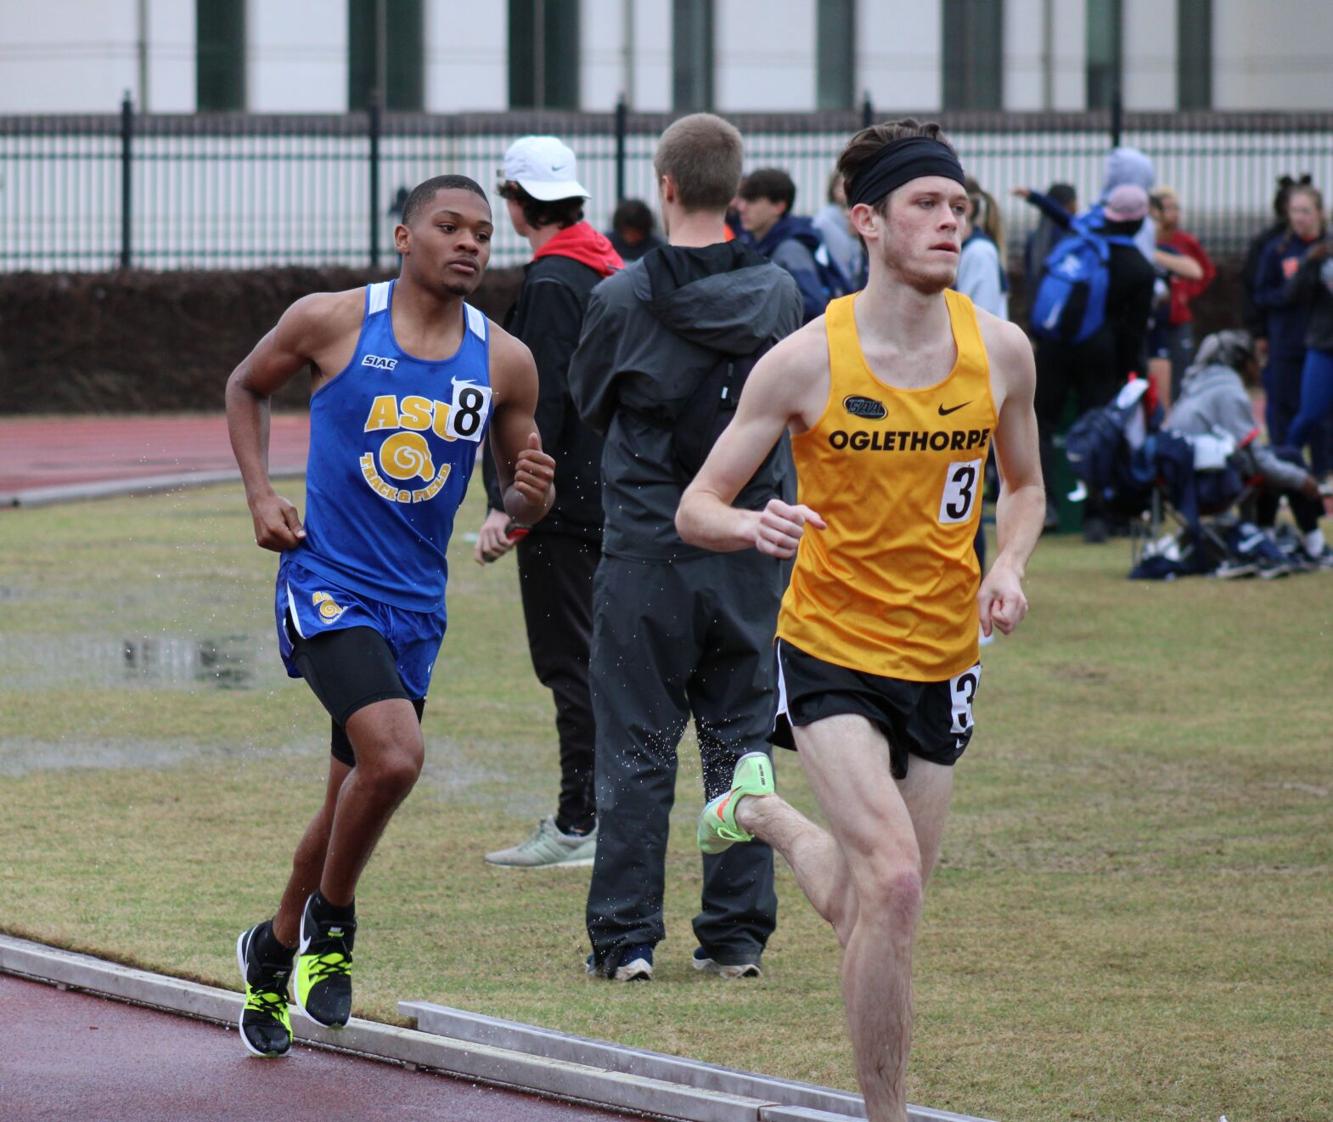 PHOTOS: Albany State Track and Field team competes in the Emory Spring